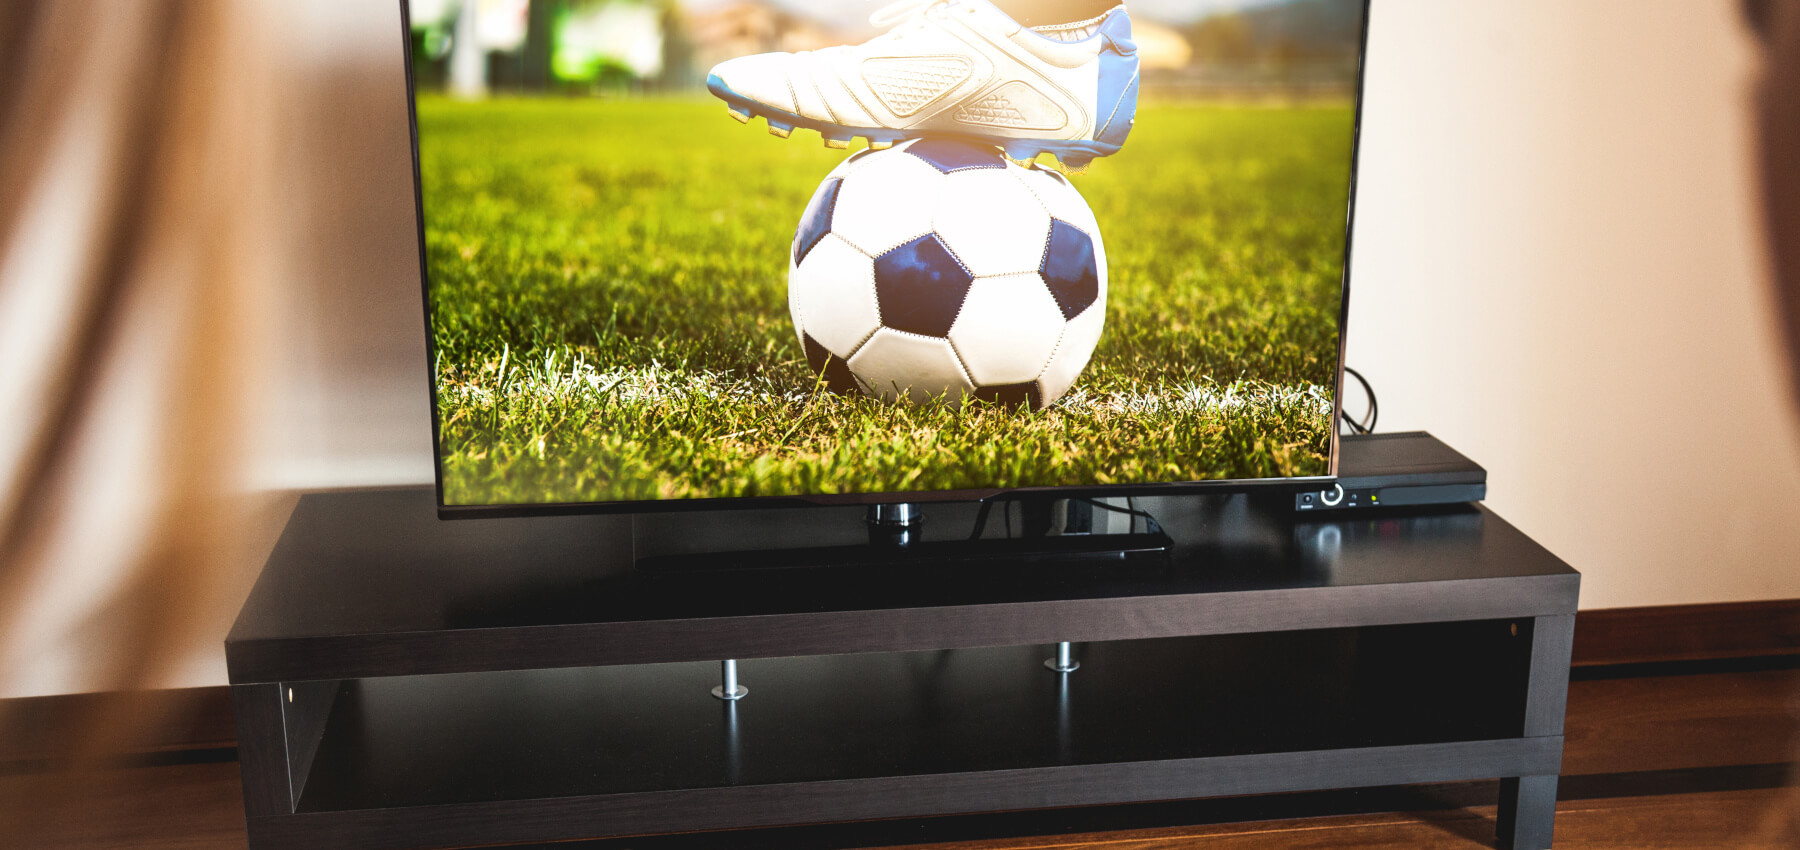 How to Watch Football on TV in Switzerland